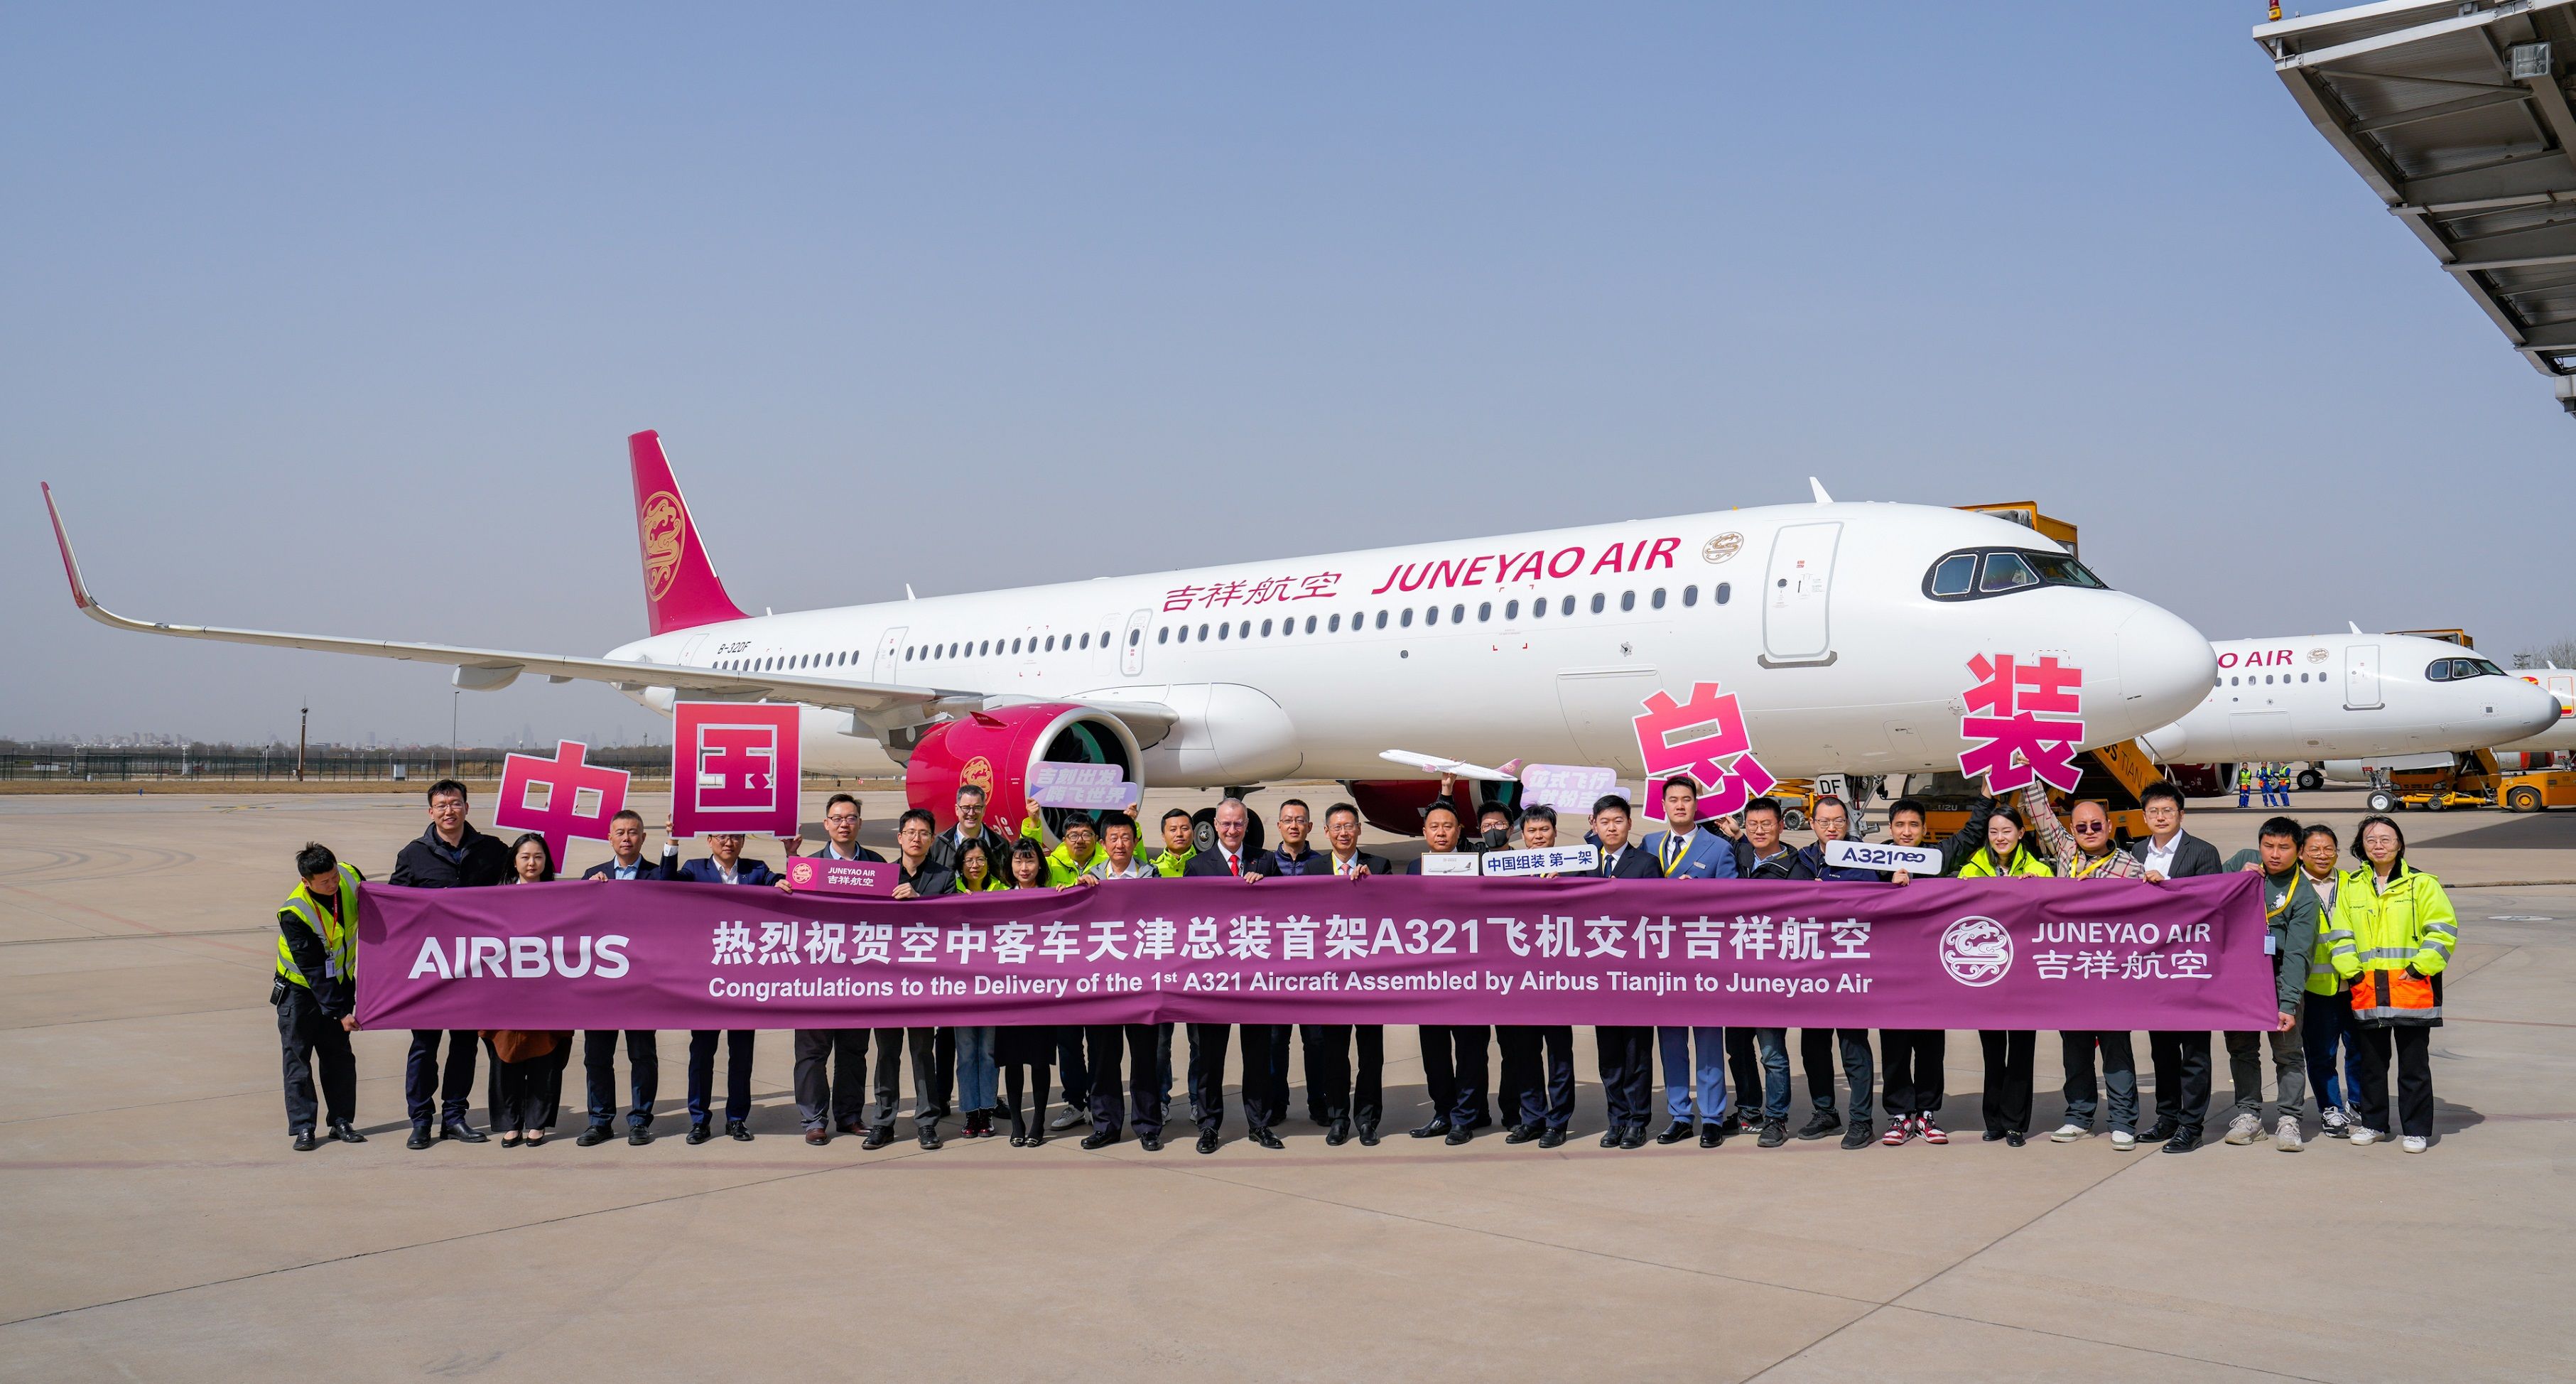 Airbus Tianjin delivers its first Airbus A321neo to Juneyao Air